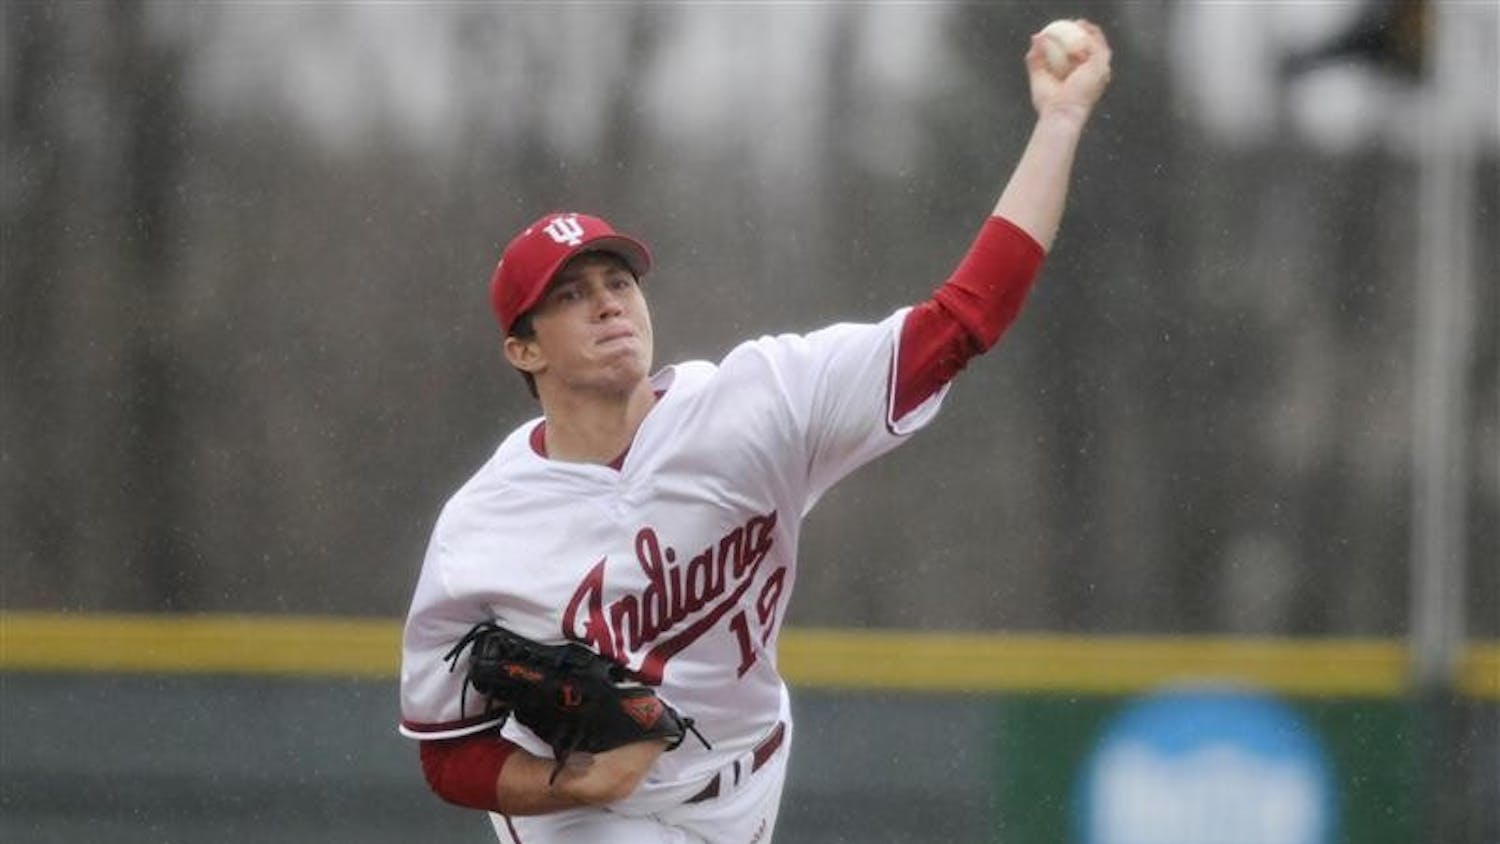 IU's Matt Bashore throws to a Chicago State batter during a game in the rain March 31 at Sembower Field.